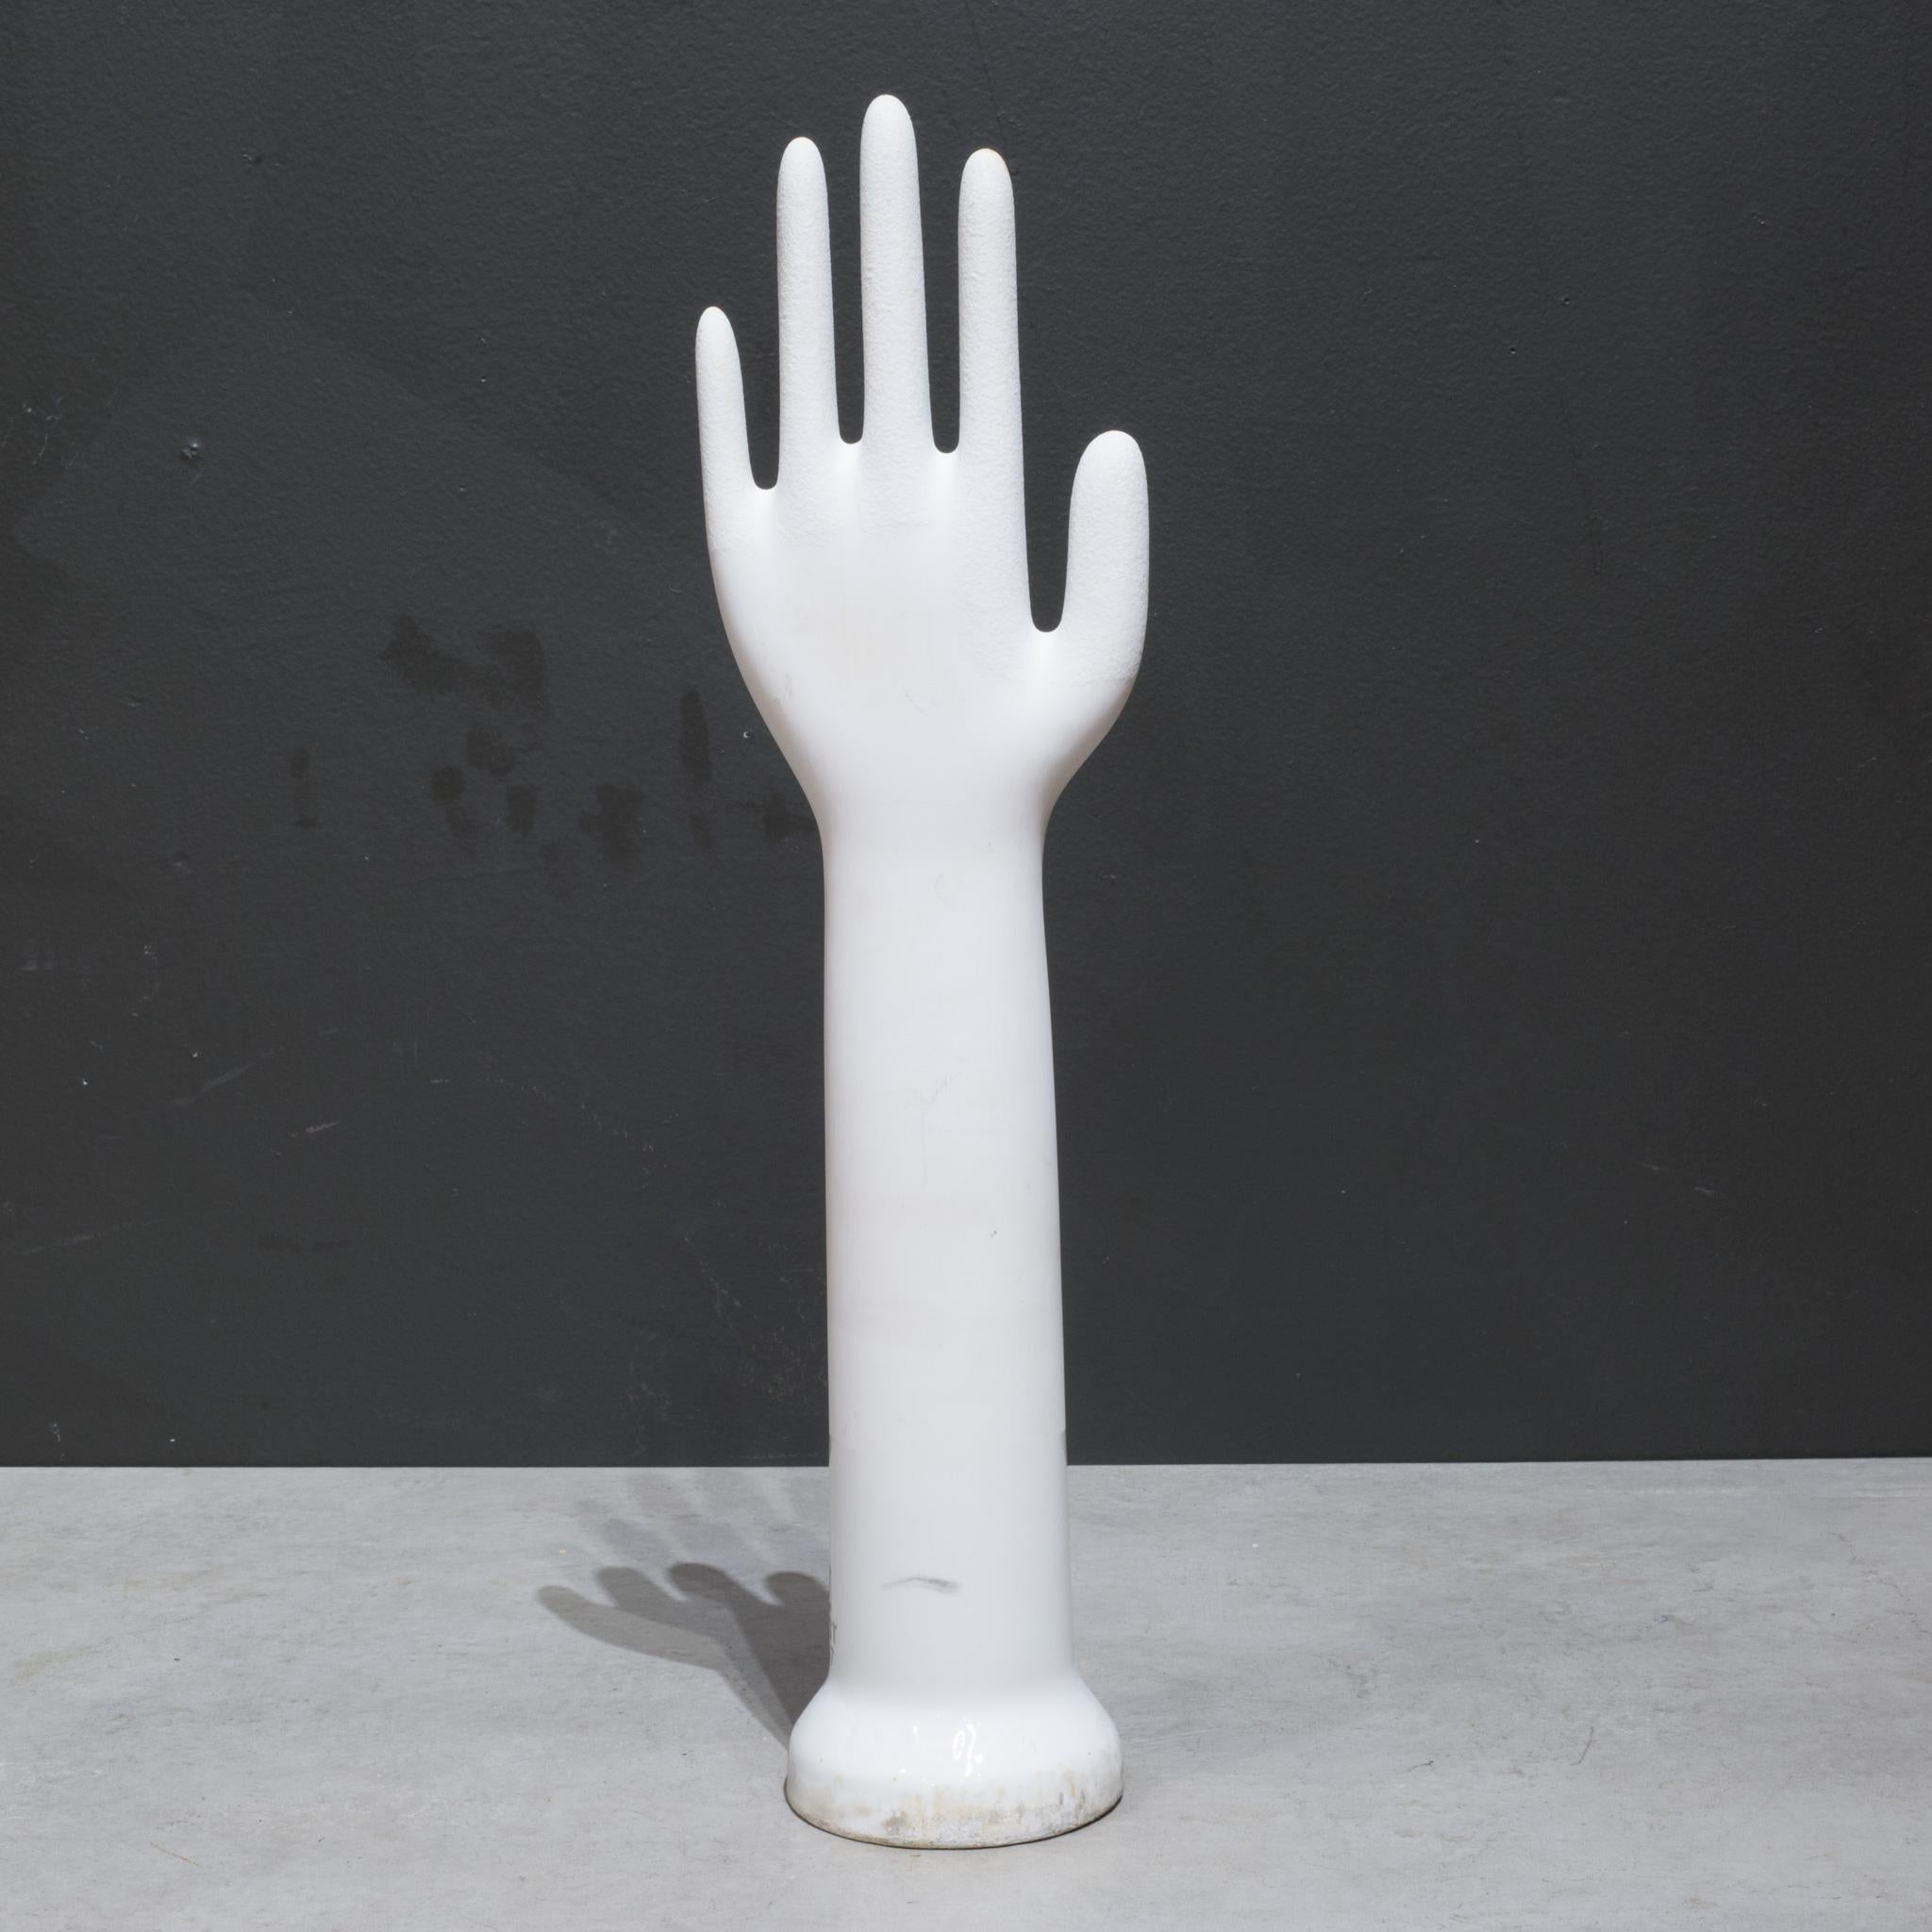 Industrial West German Glazed Porcelain Factory Rubber Glove Molds c.1987  (FREE SHIPPING) For Sale